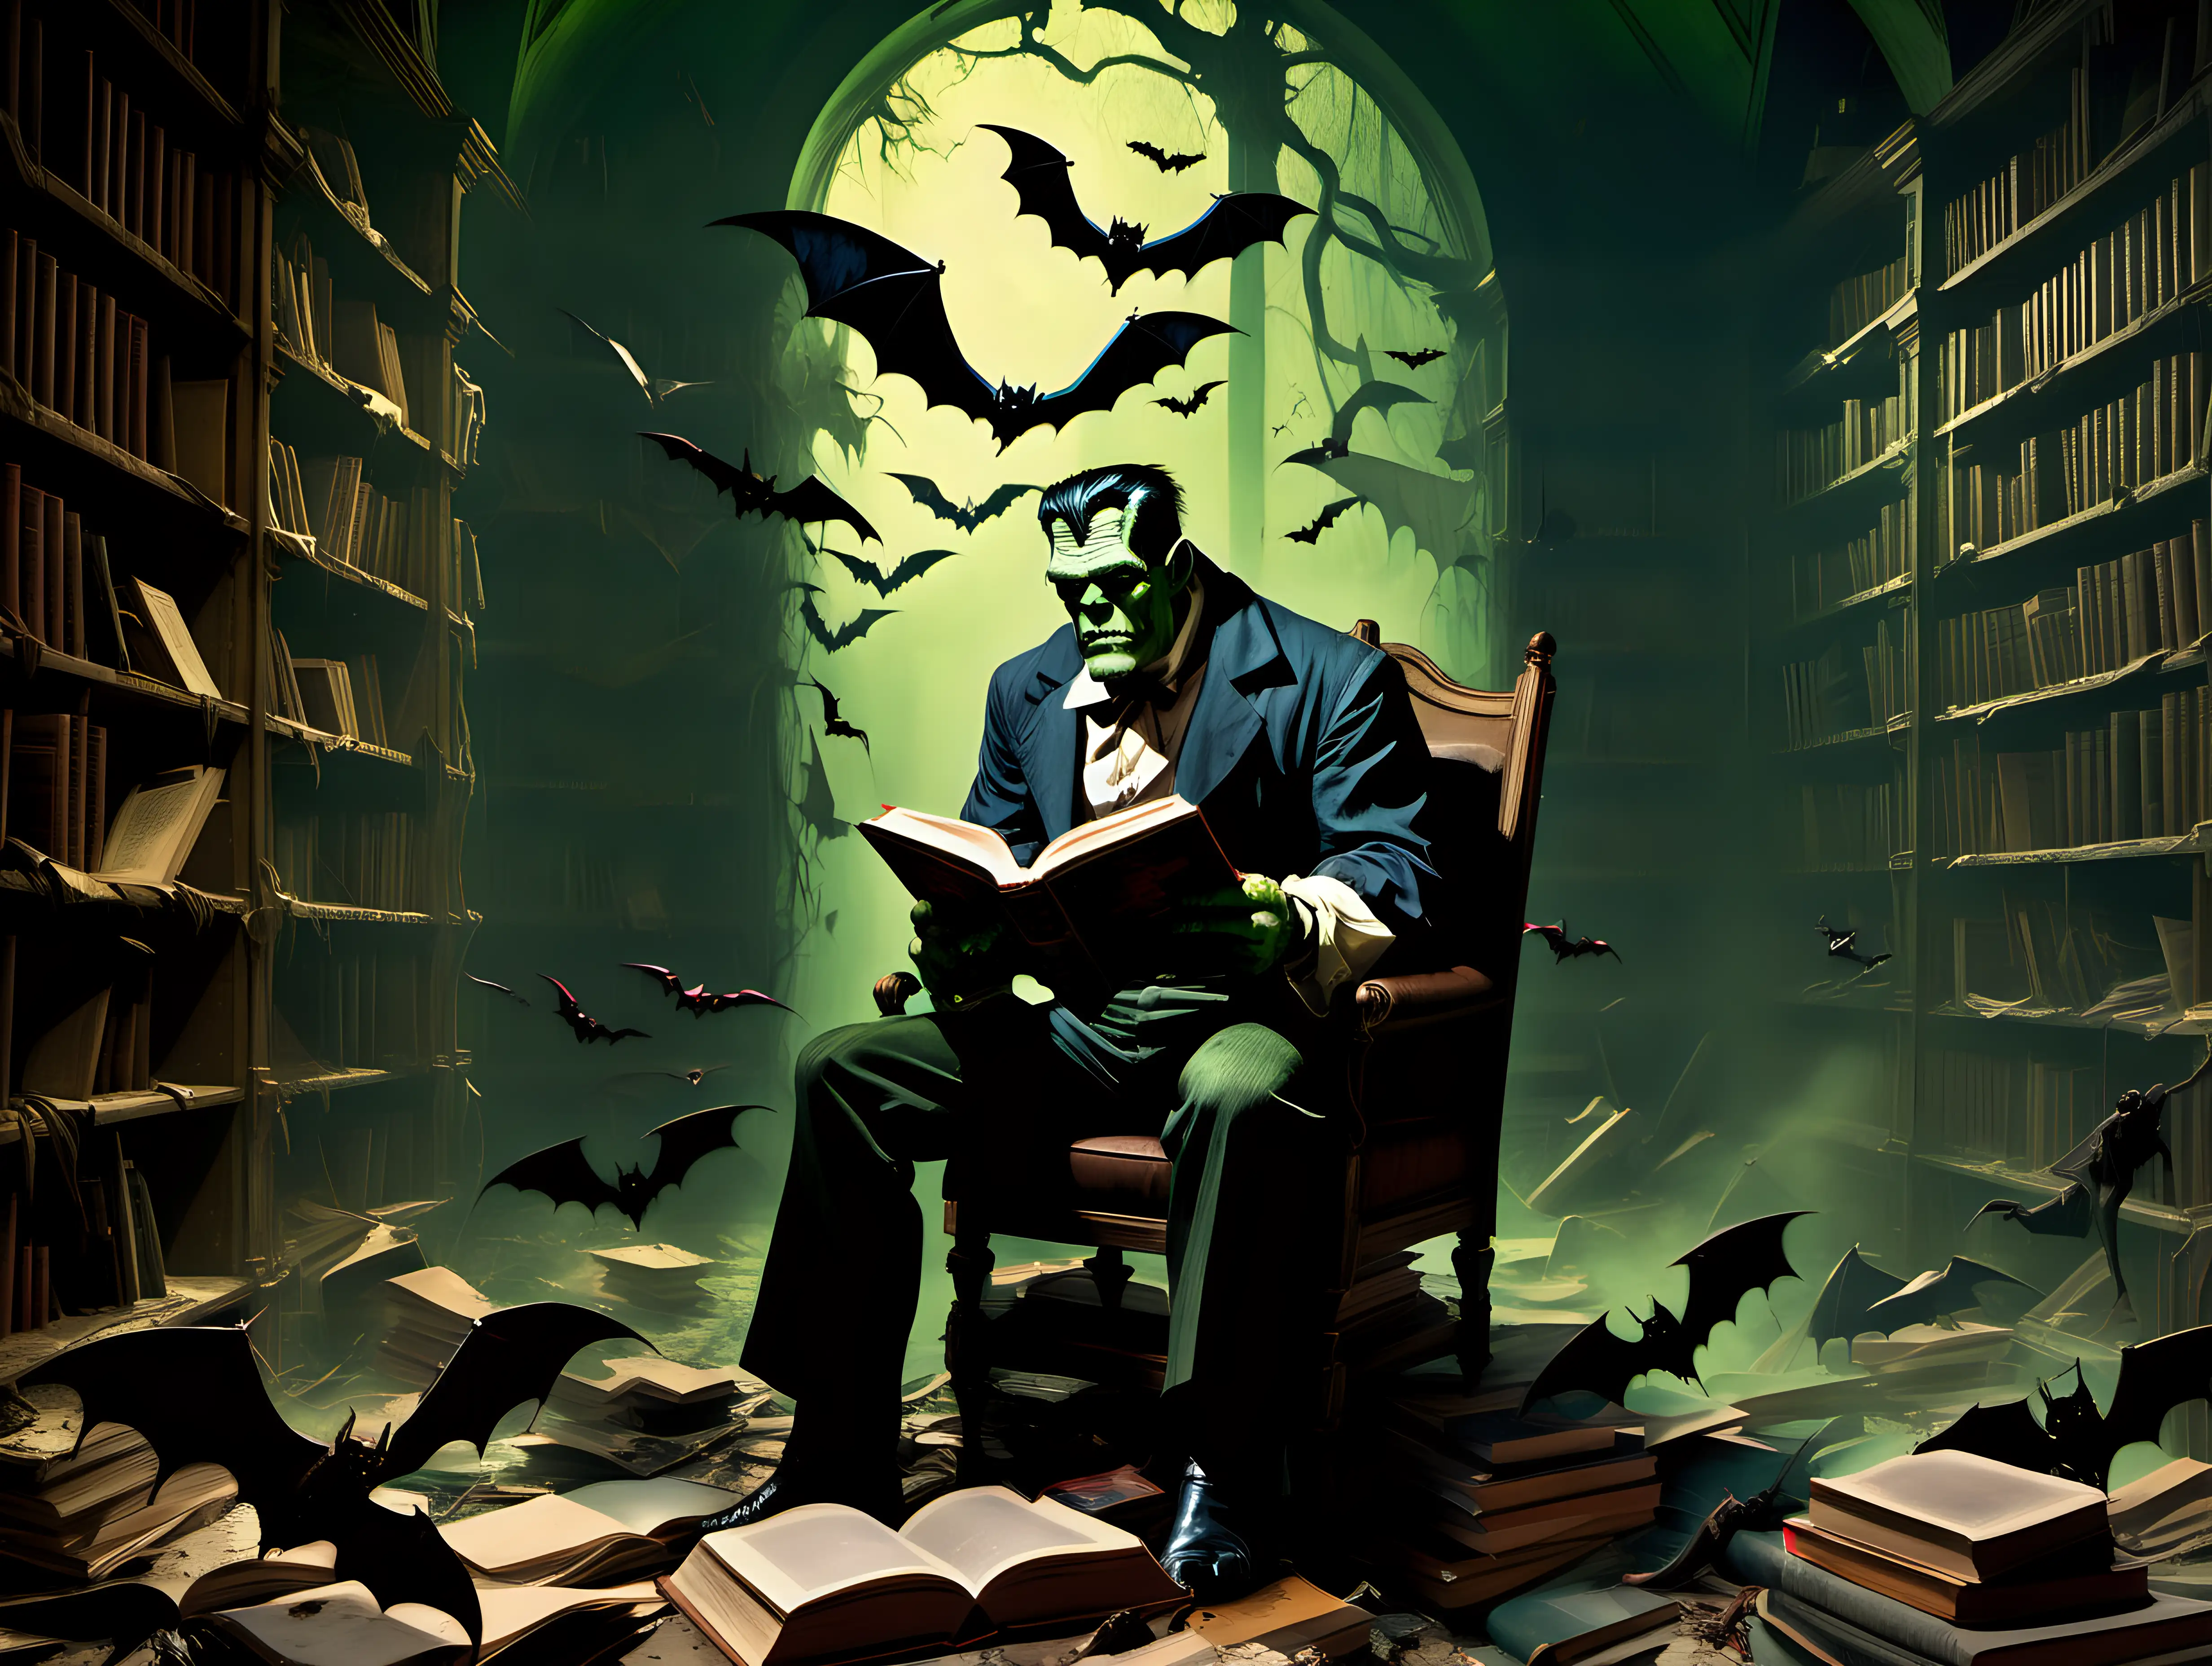 Frankenstein reading a book inside of an abandoned forgotten library and vampire bats flying around in the Amazon forest Frank Frazetta style